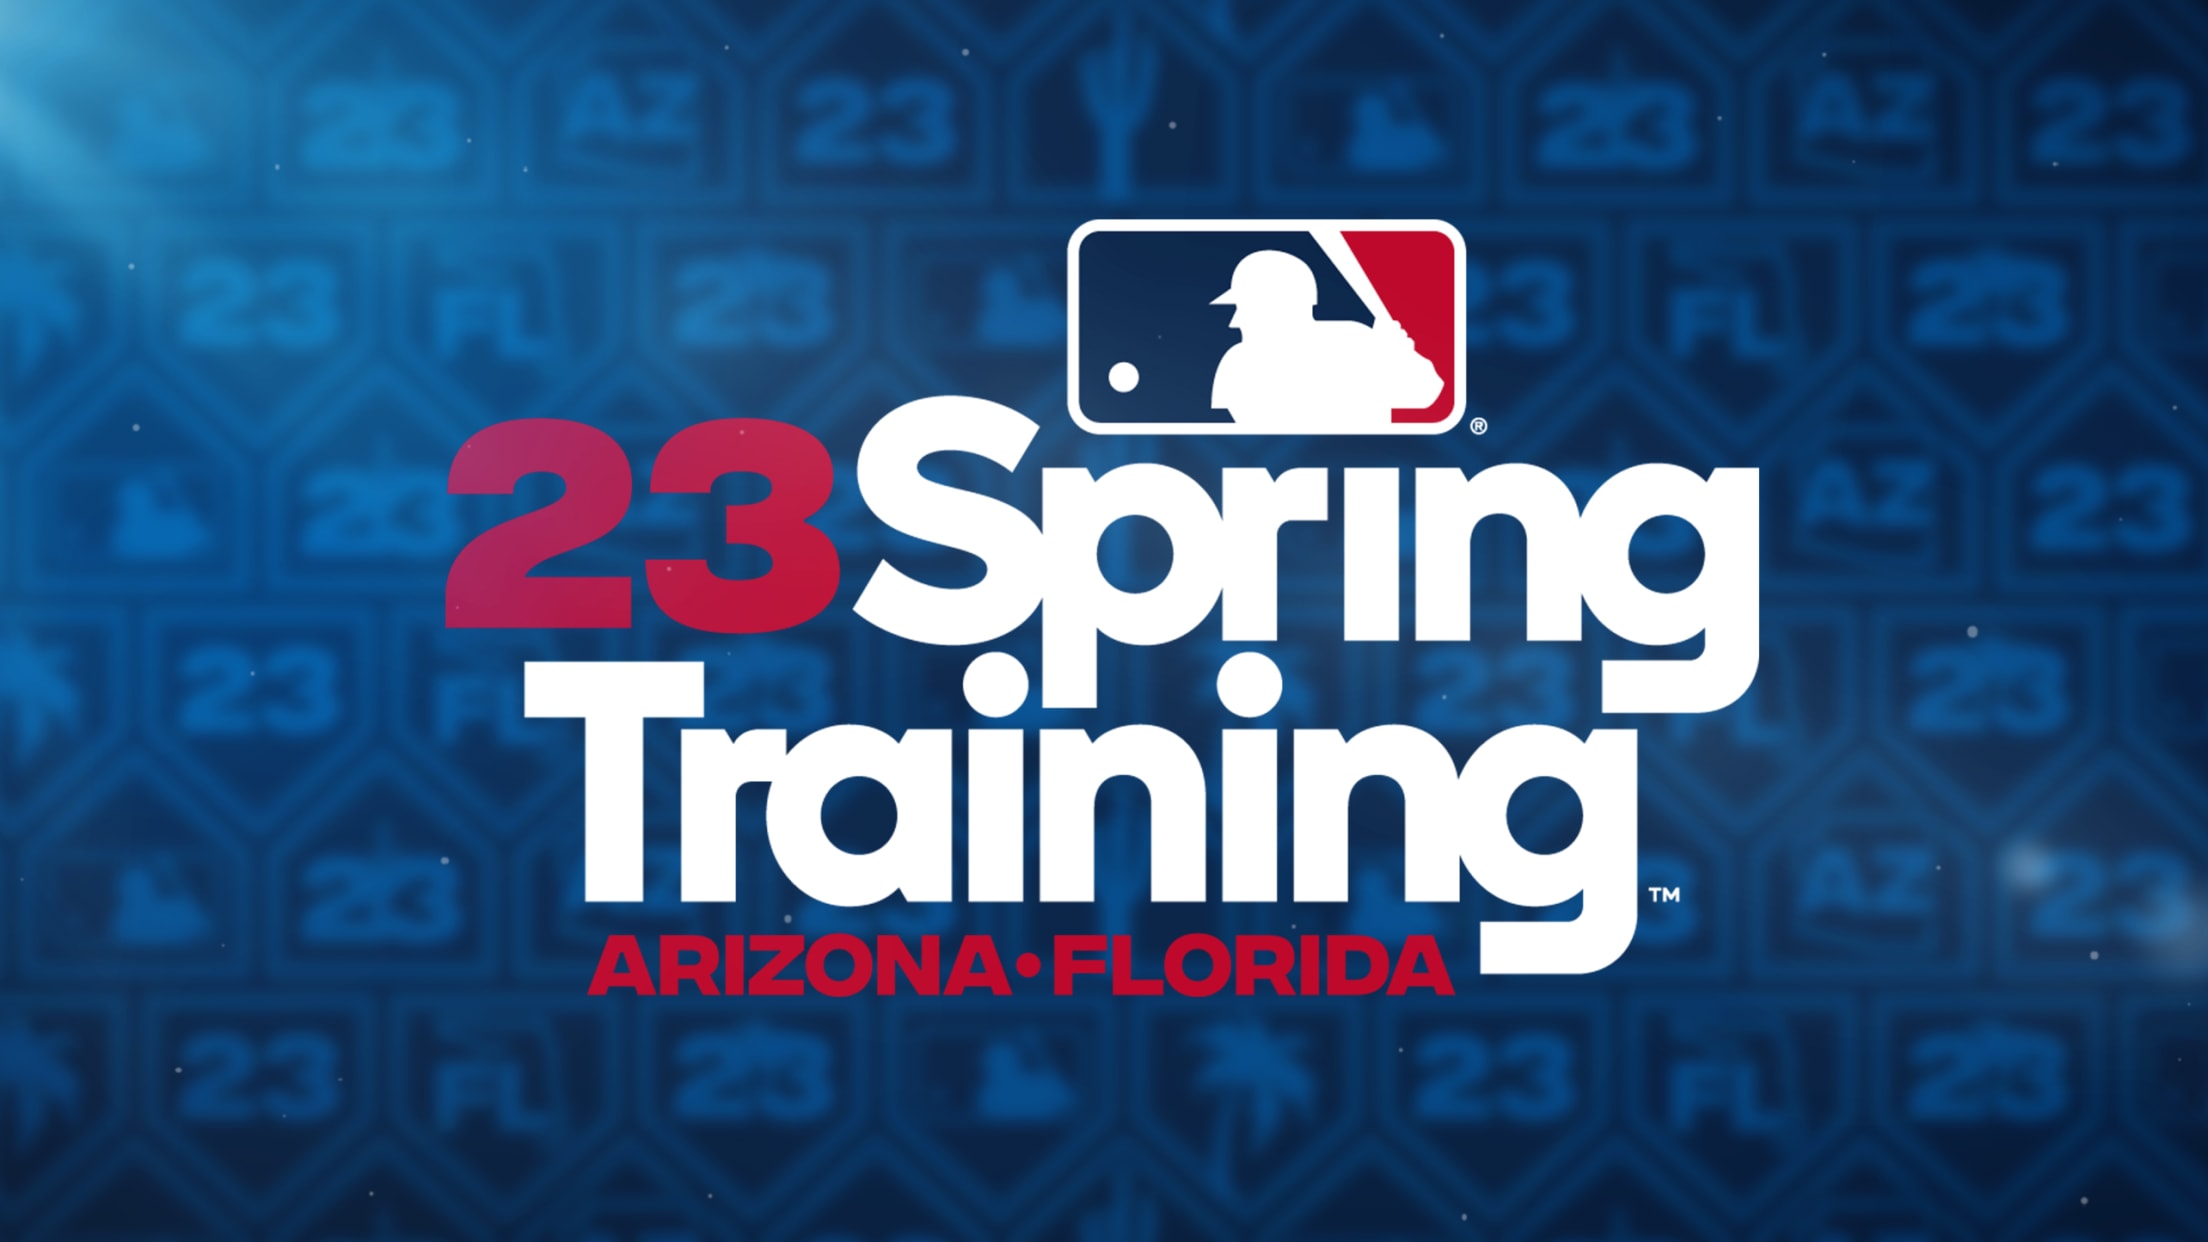 Phillies announce new spring training schedule onsale date  Phillies  Nation  Your source for Philadelphia Phillies news opinion history  rumors events and other fun stuff